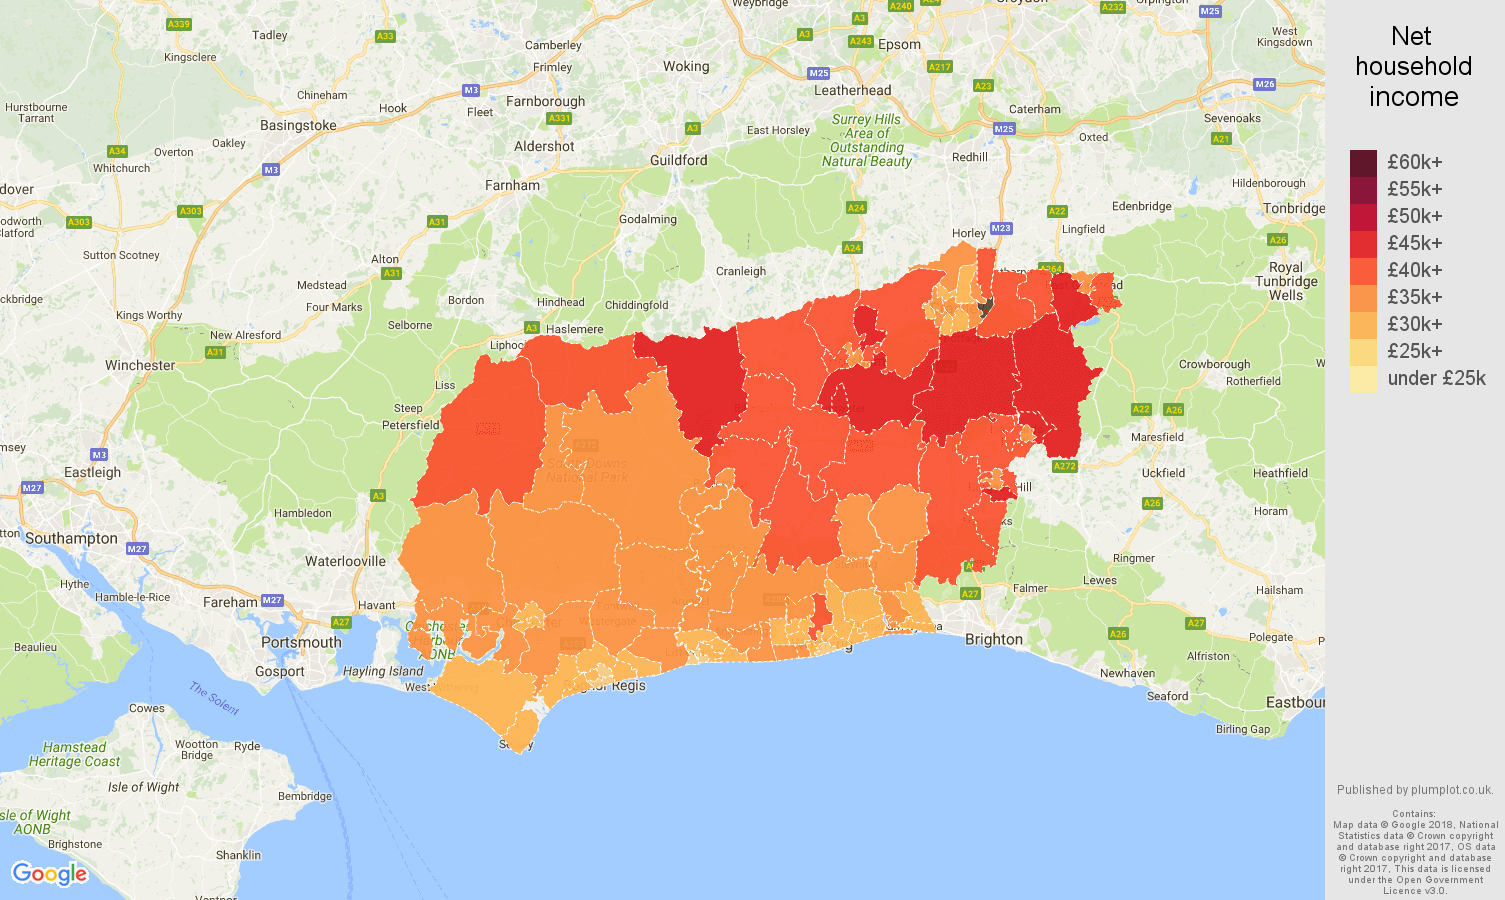 West Sussex net household income map